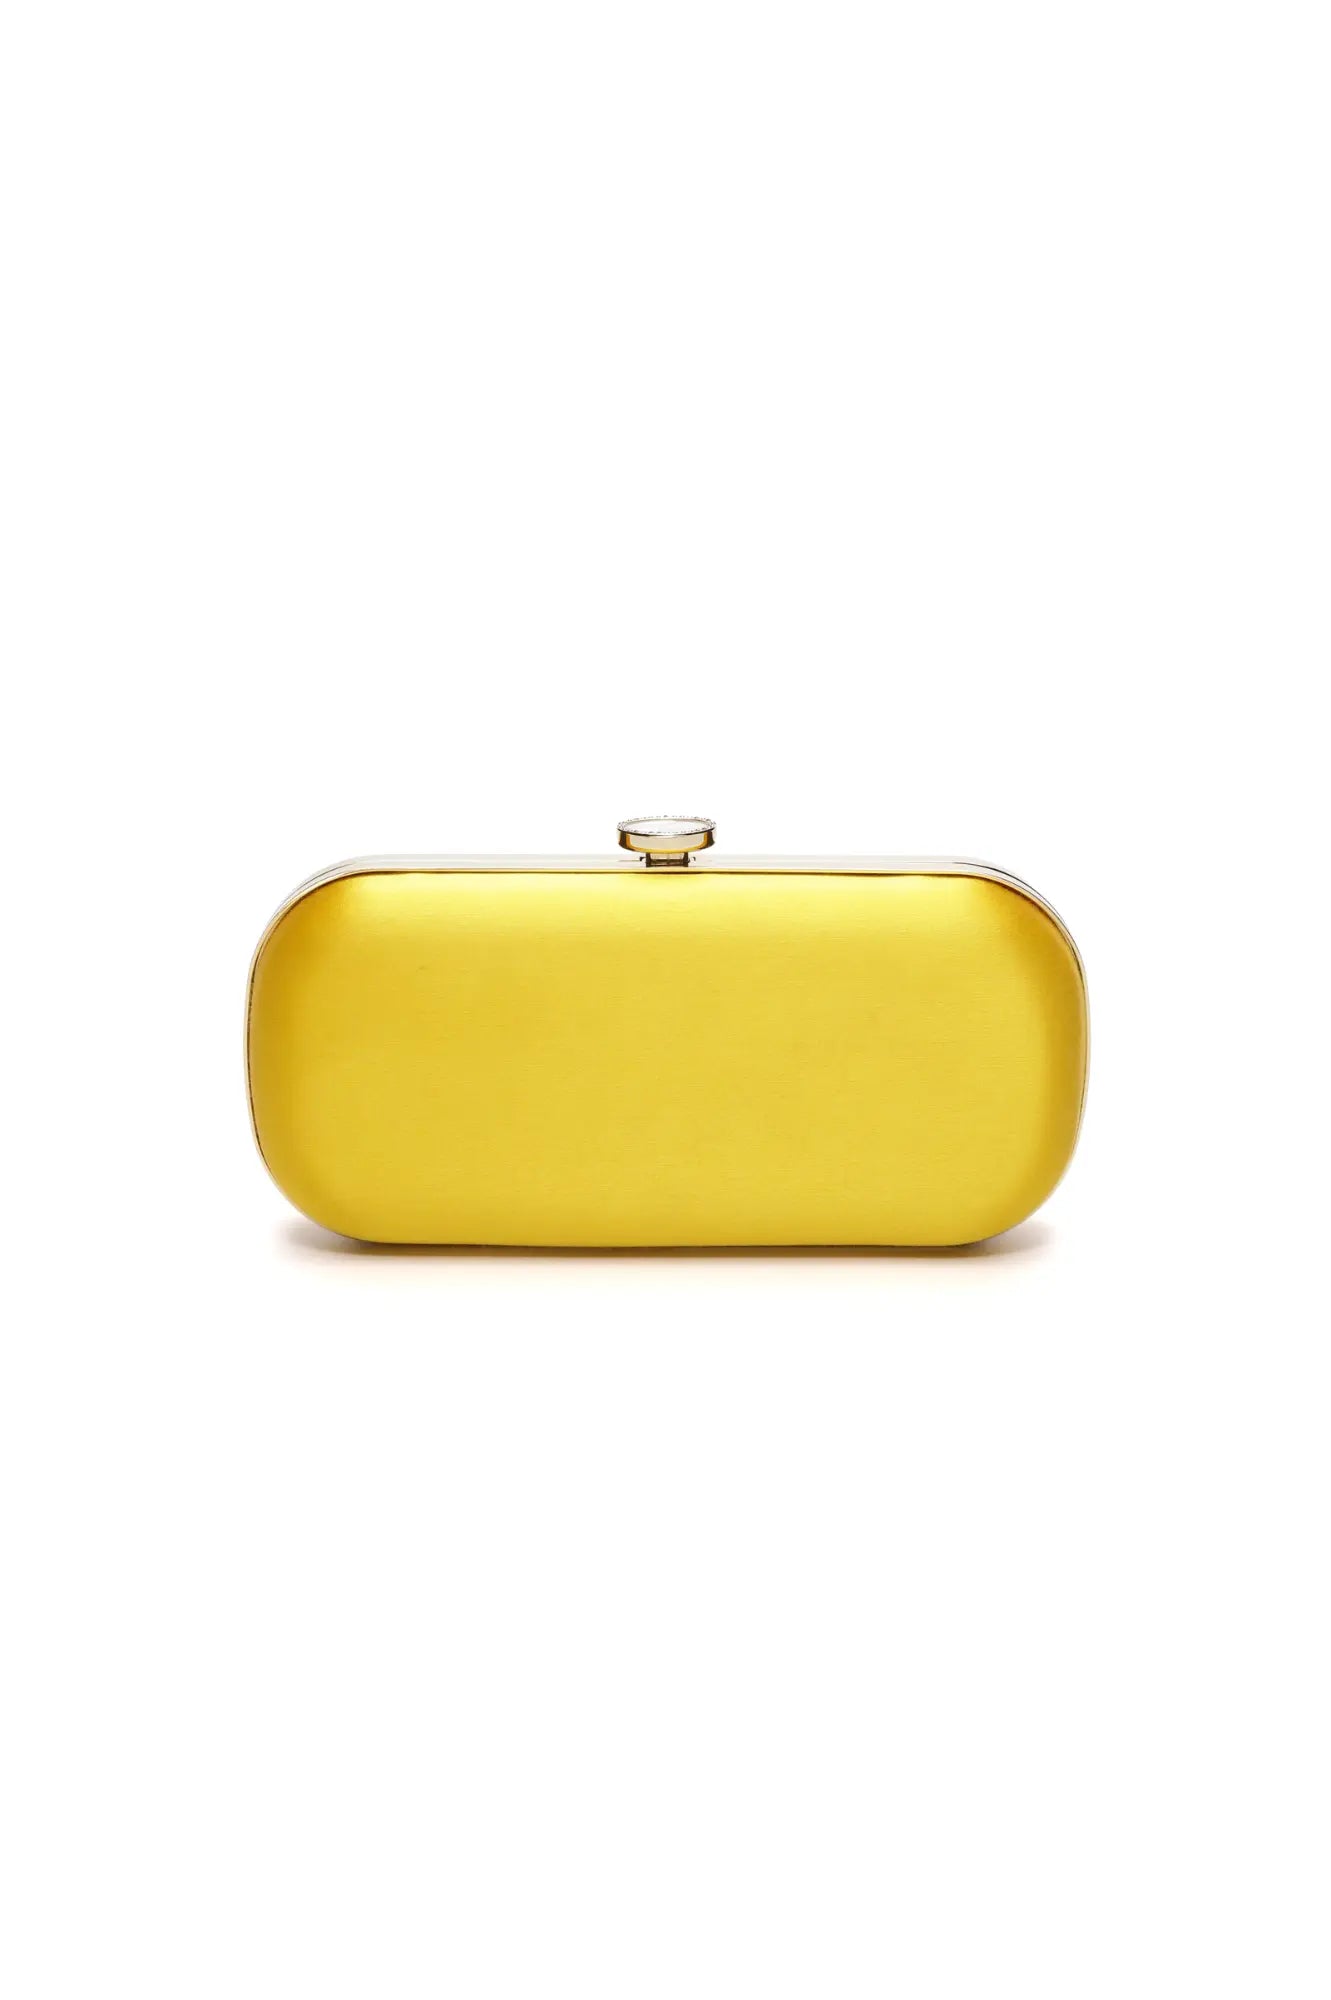 A Bella Clutch Limoncello Yellow Petite from The Bella Rosa Collection on a white background.